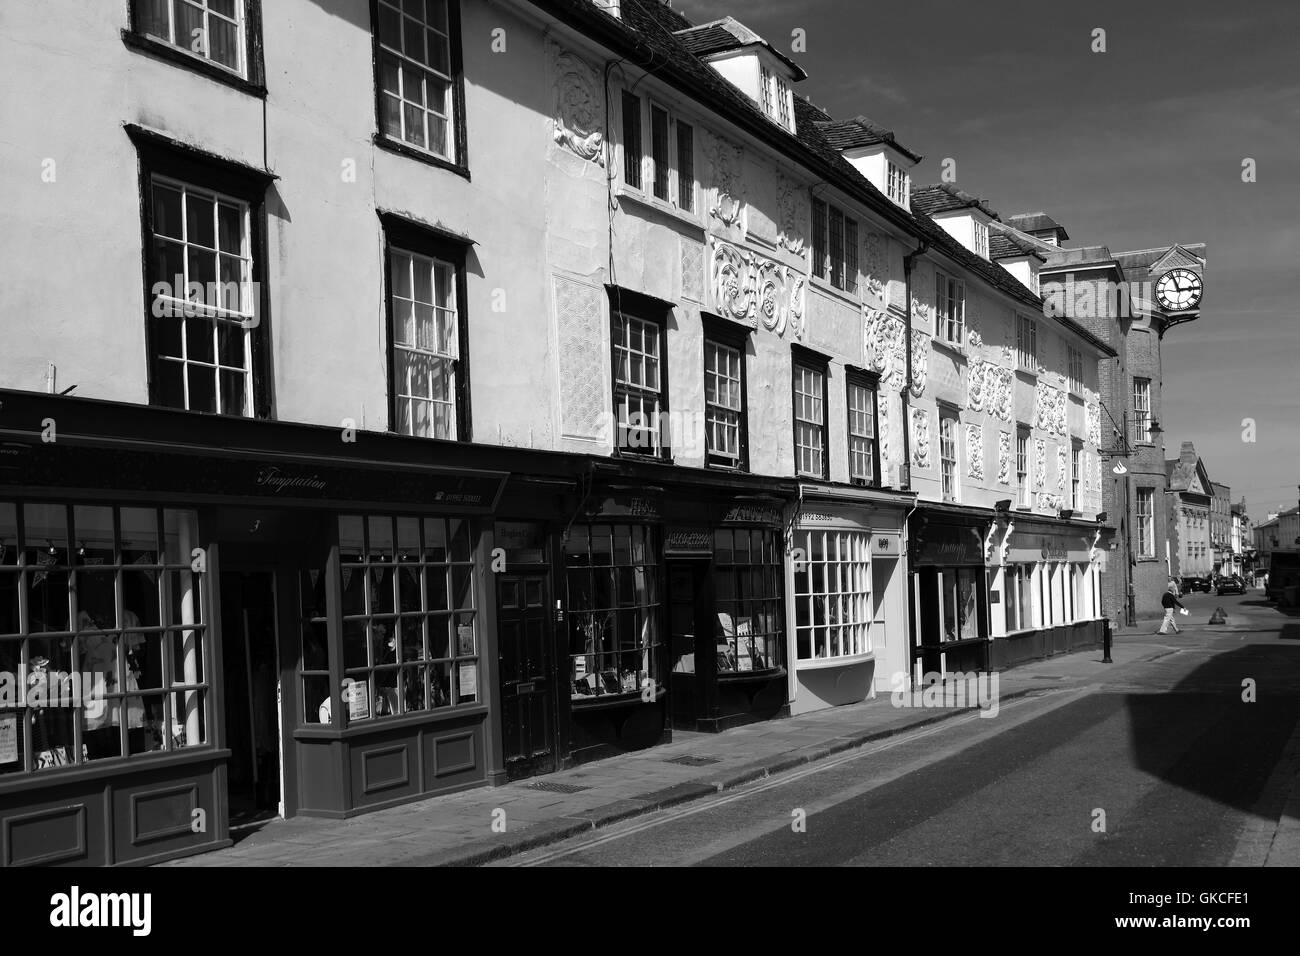 A row of shops in Hertford town, Hertfordshire, England. Stock Photo